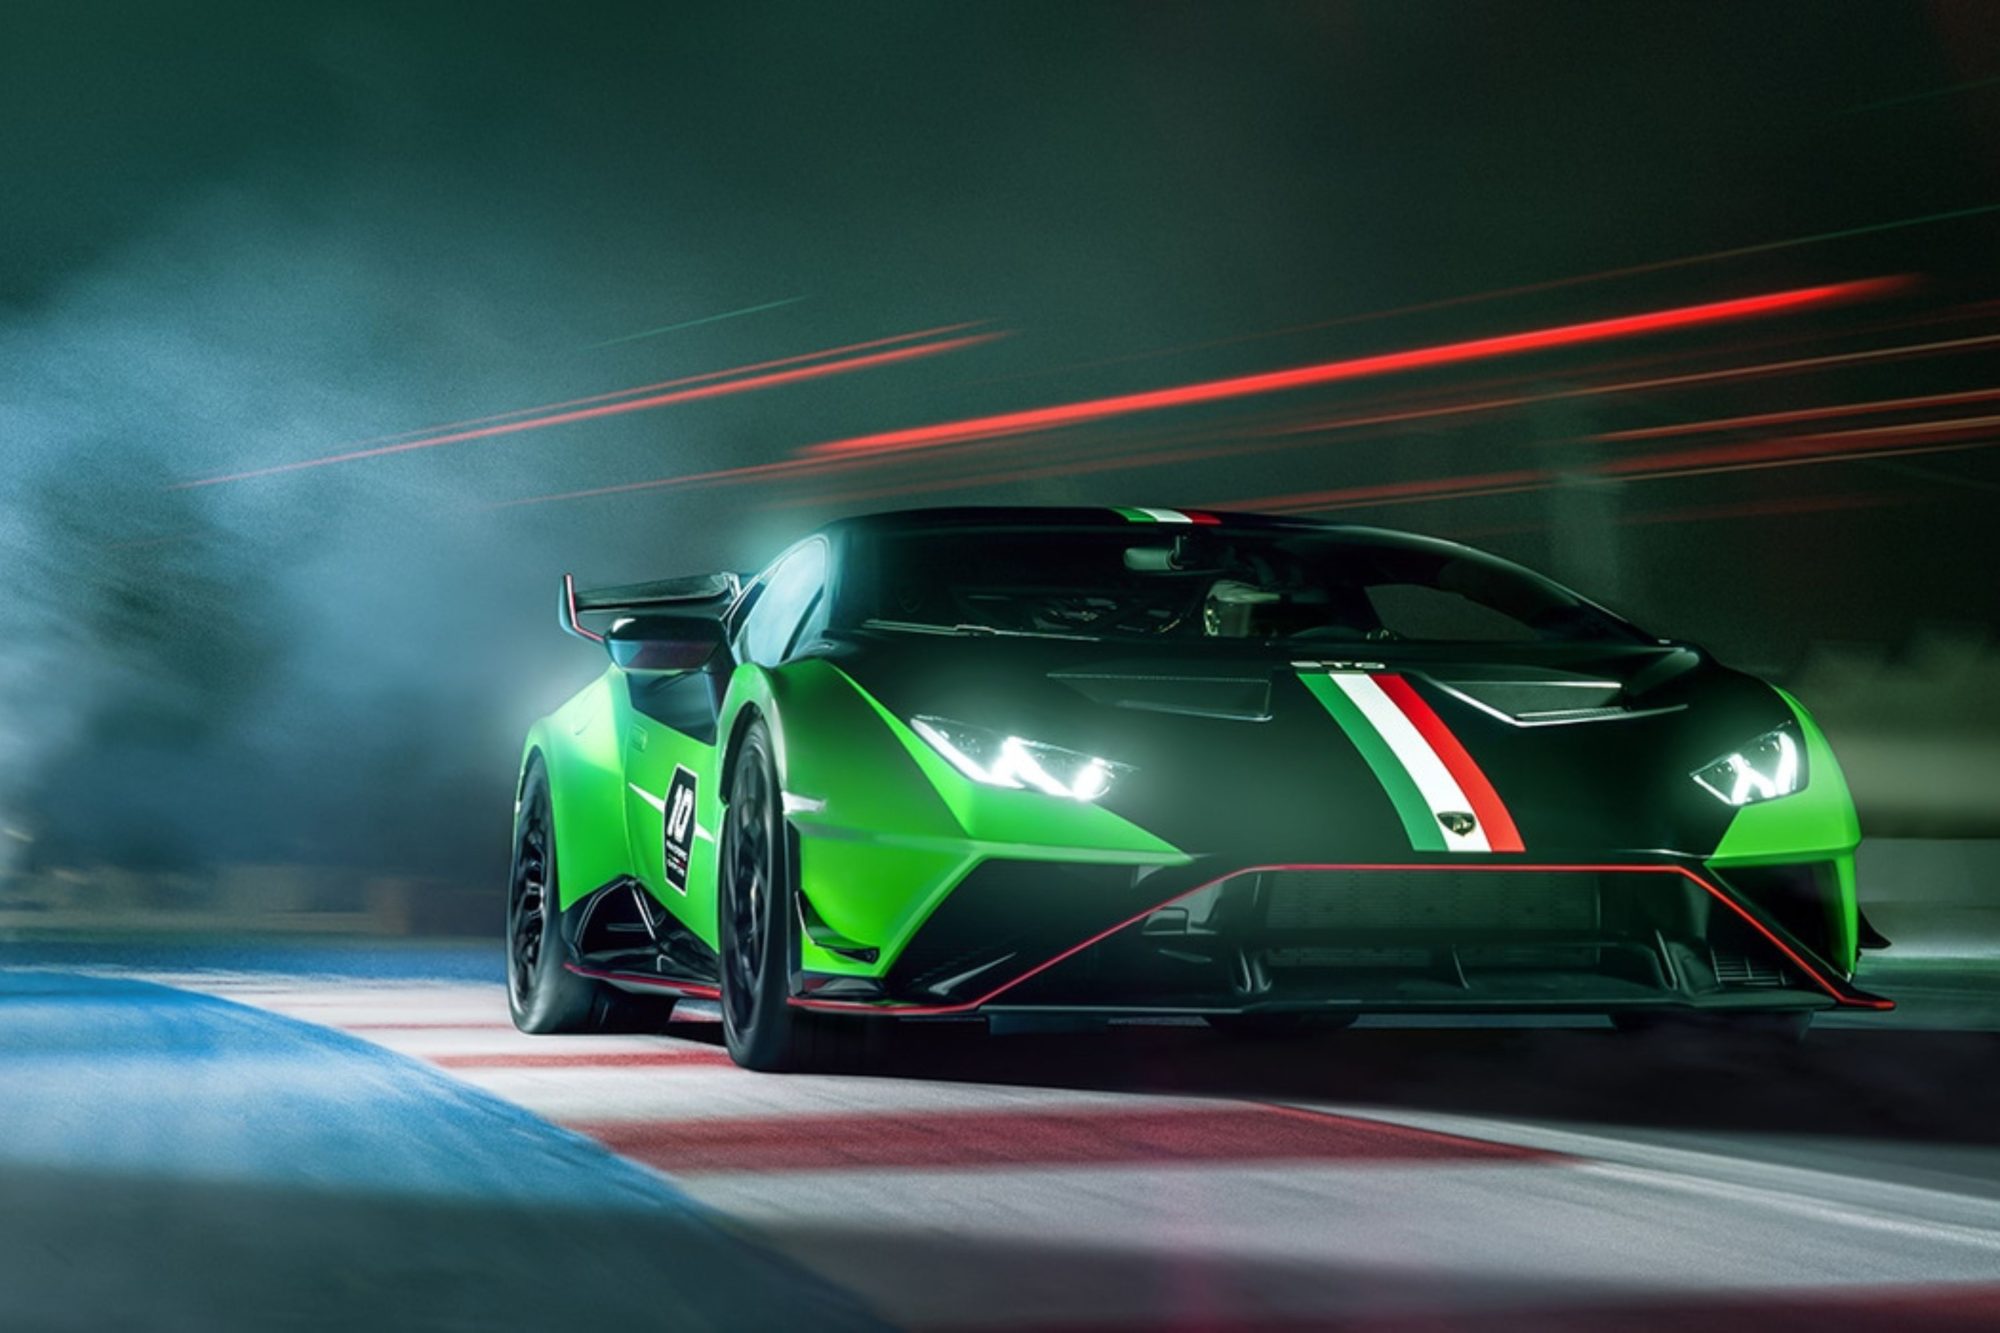 Lamborghini has unveiled a special edition of the Huracan STO